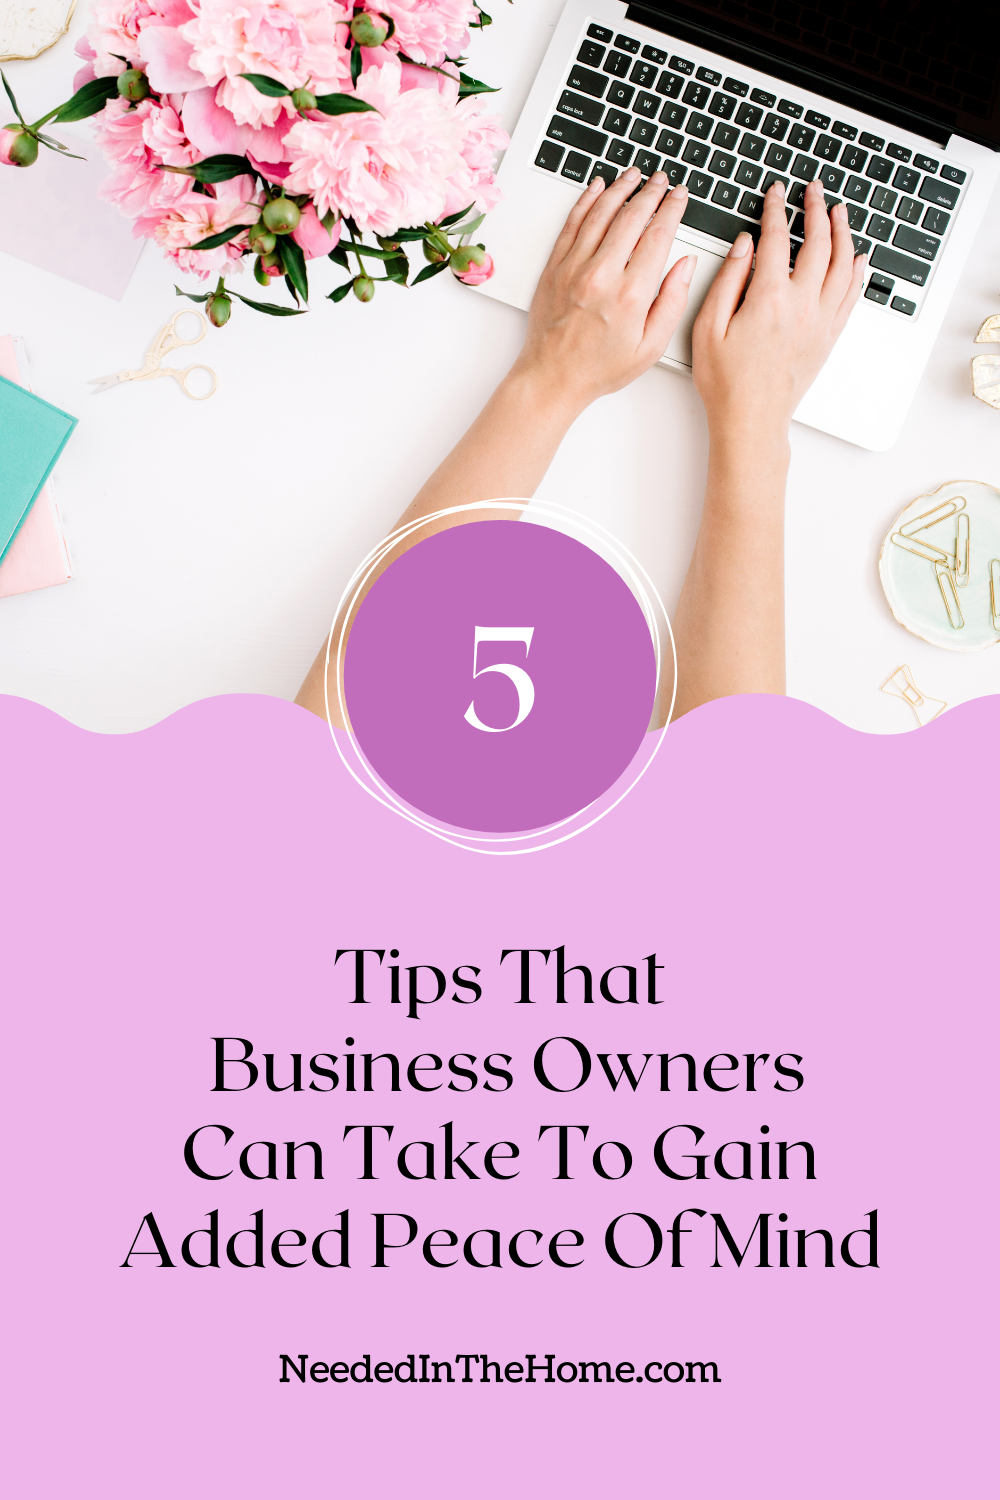 pinterest-pin-description 5 tips that business owners can take to gain added peace of mind hands laptop flowers desk neededinthehome